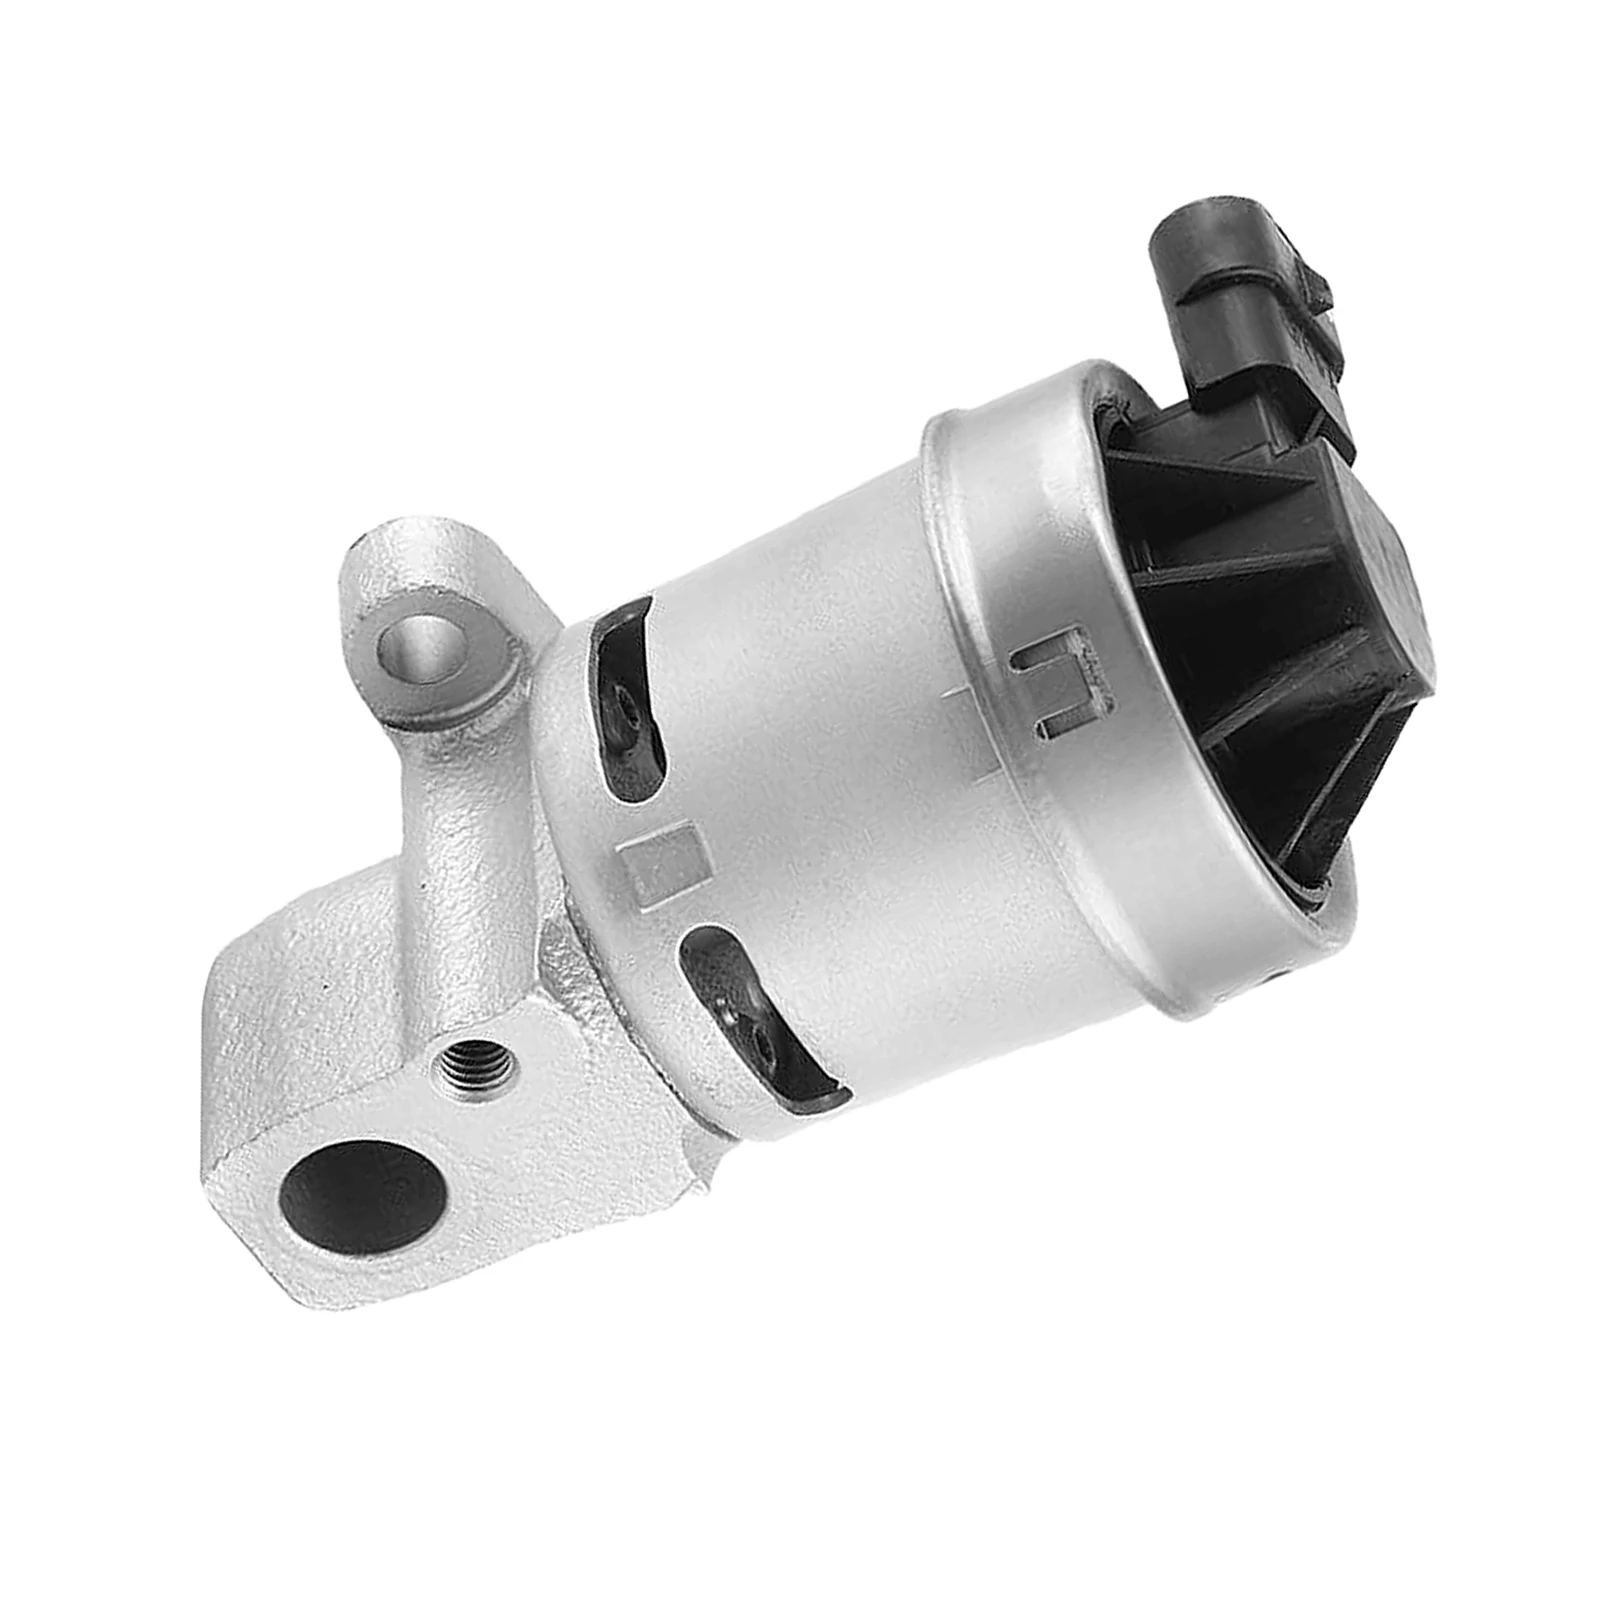 Car EGV612 Exhaust Gas Recirculation Valve Direct Replaces fits for CHEVROLET